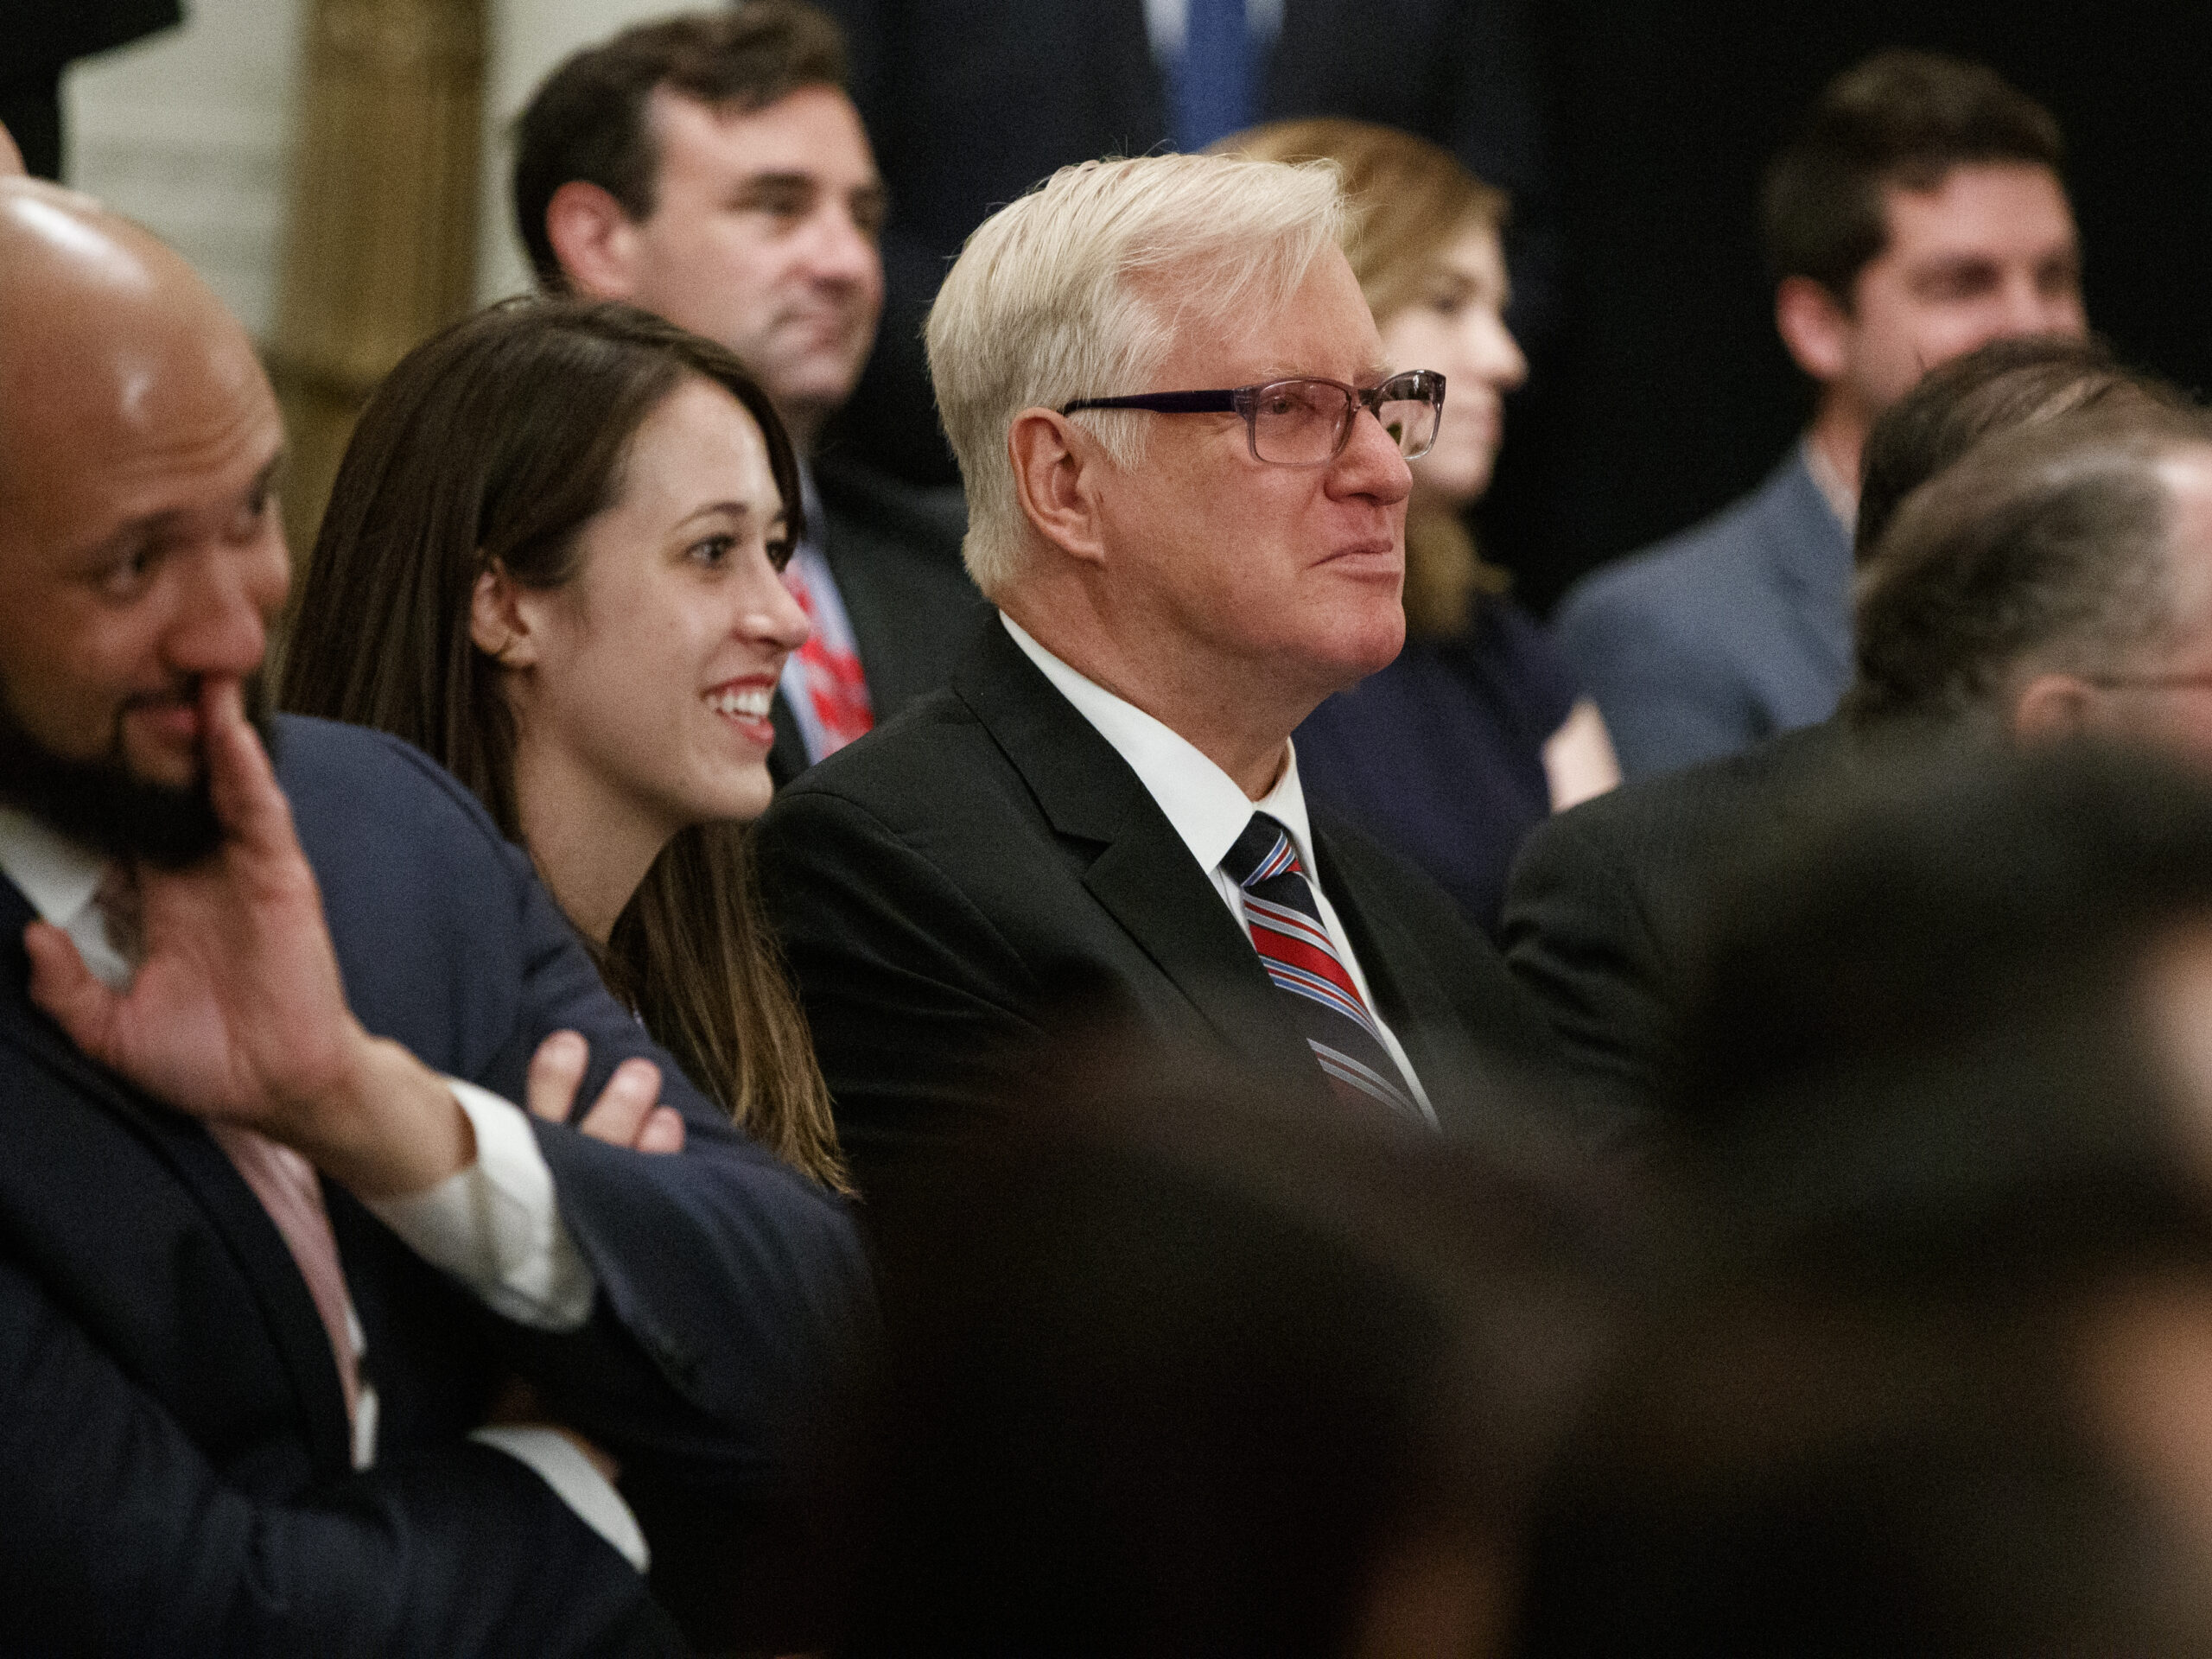 Jim Hoft, owner of the Gateway Pundit, at the White House in 2019. The website has been hit with defamation lawsuits related to 2020 election fraud conspiracy theories it is accused of spreading.